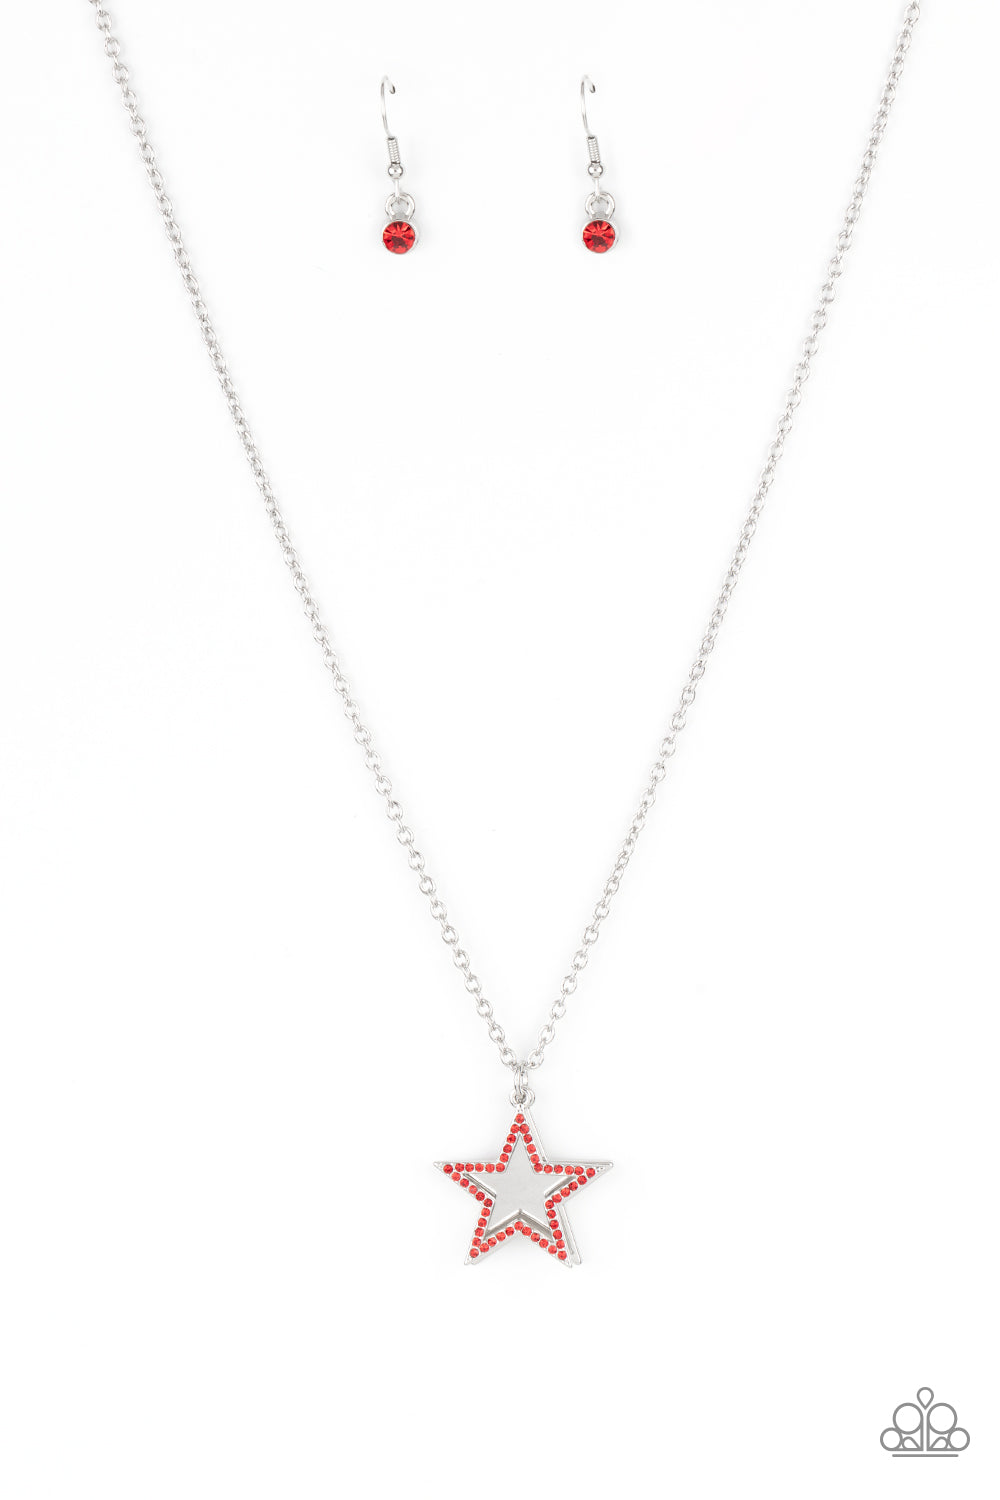 American Anthem - red - Paparazzi necklace